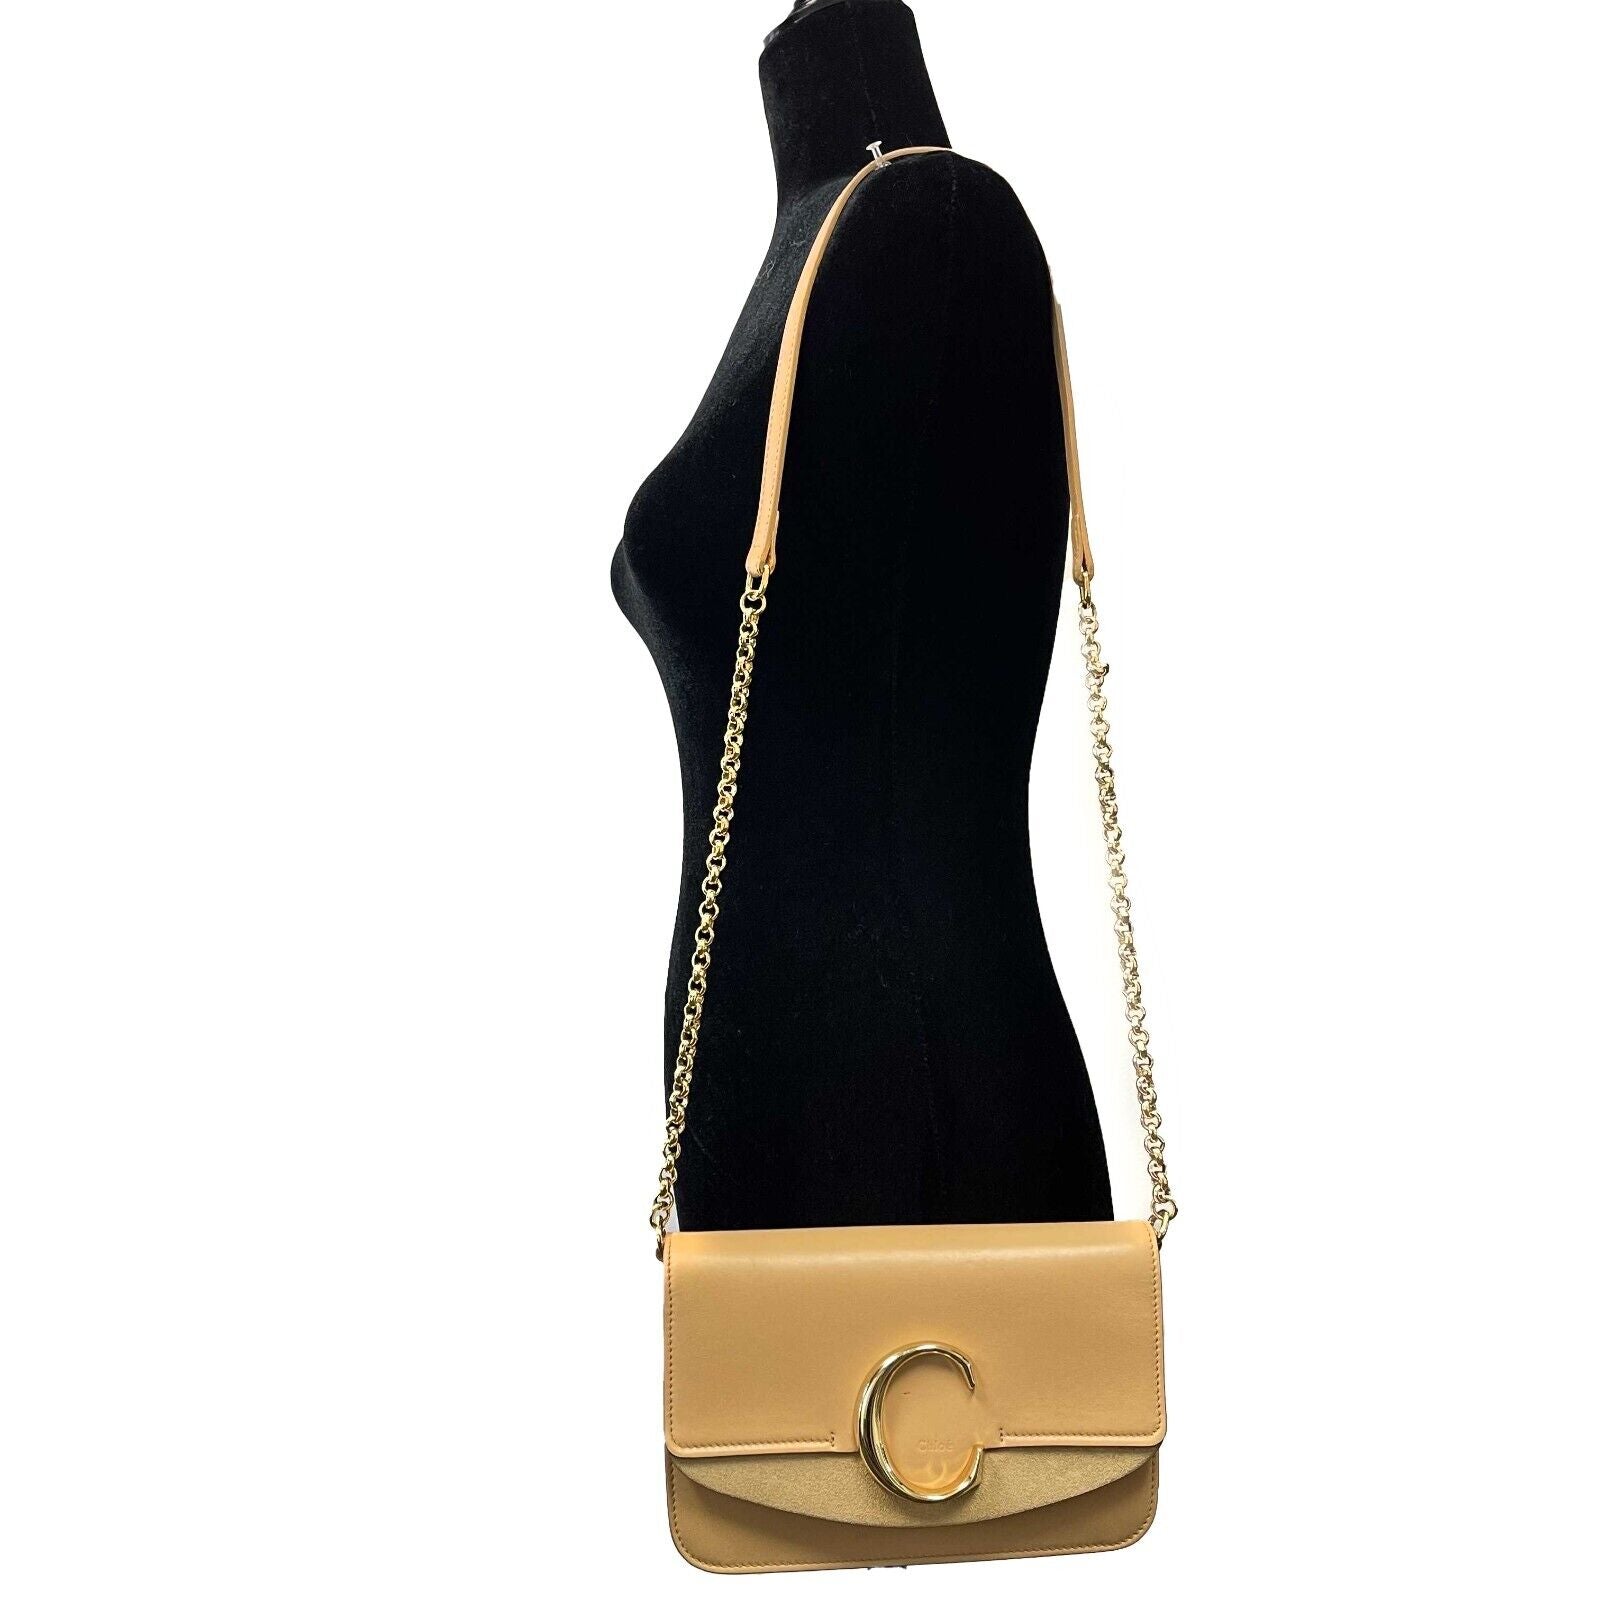 At Auction: Chloe - C Clutch With Chain Crossbody / Shoulder Bag